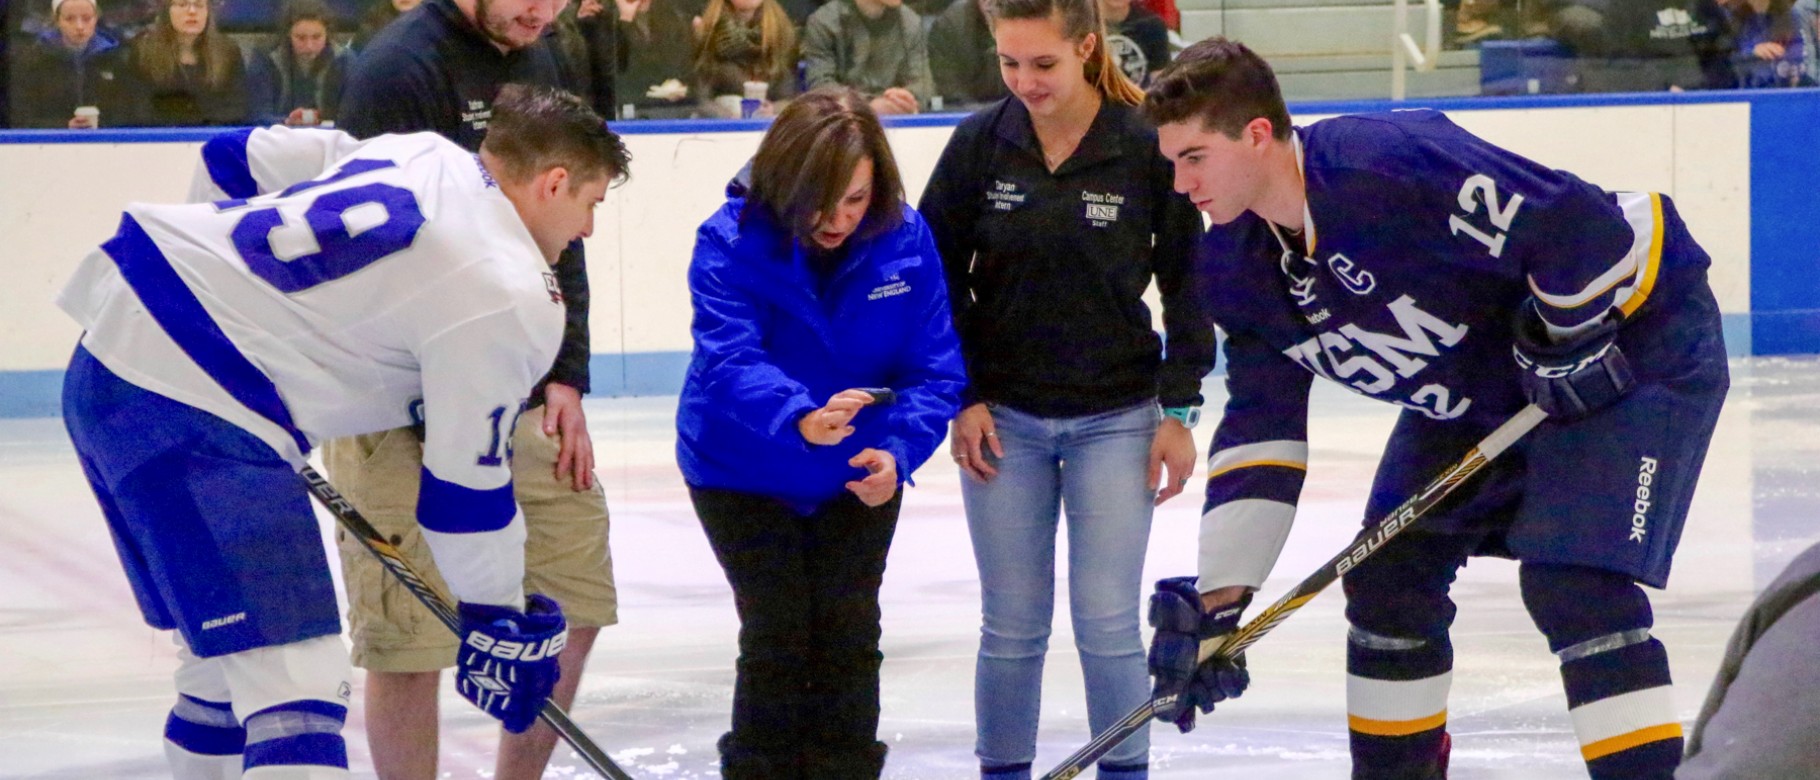 President Danielle Ripich drops the puck at Friday night's hockey game